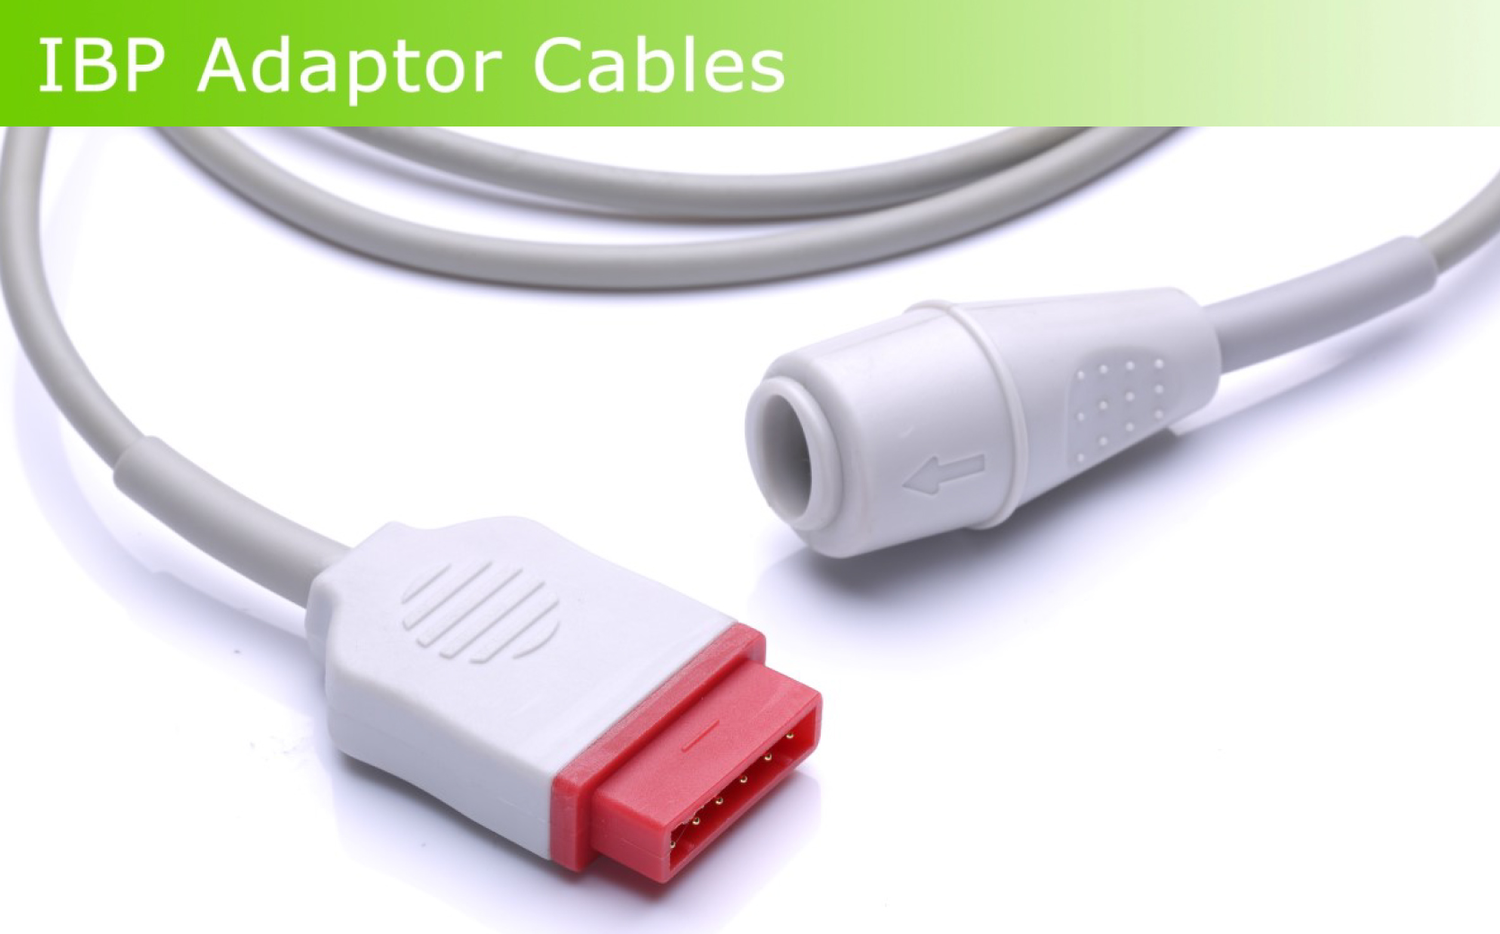 <p><span style="font-weight: bold;">IBP Adaptor Cables</span><br></p>